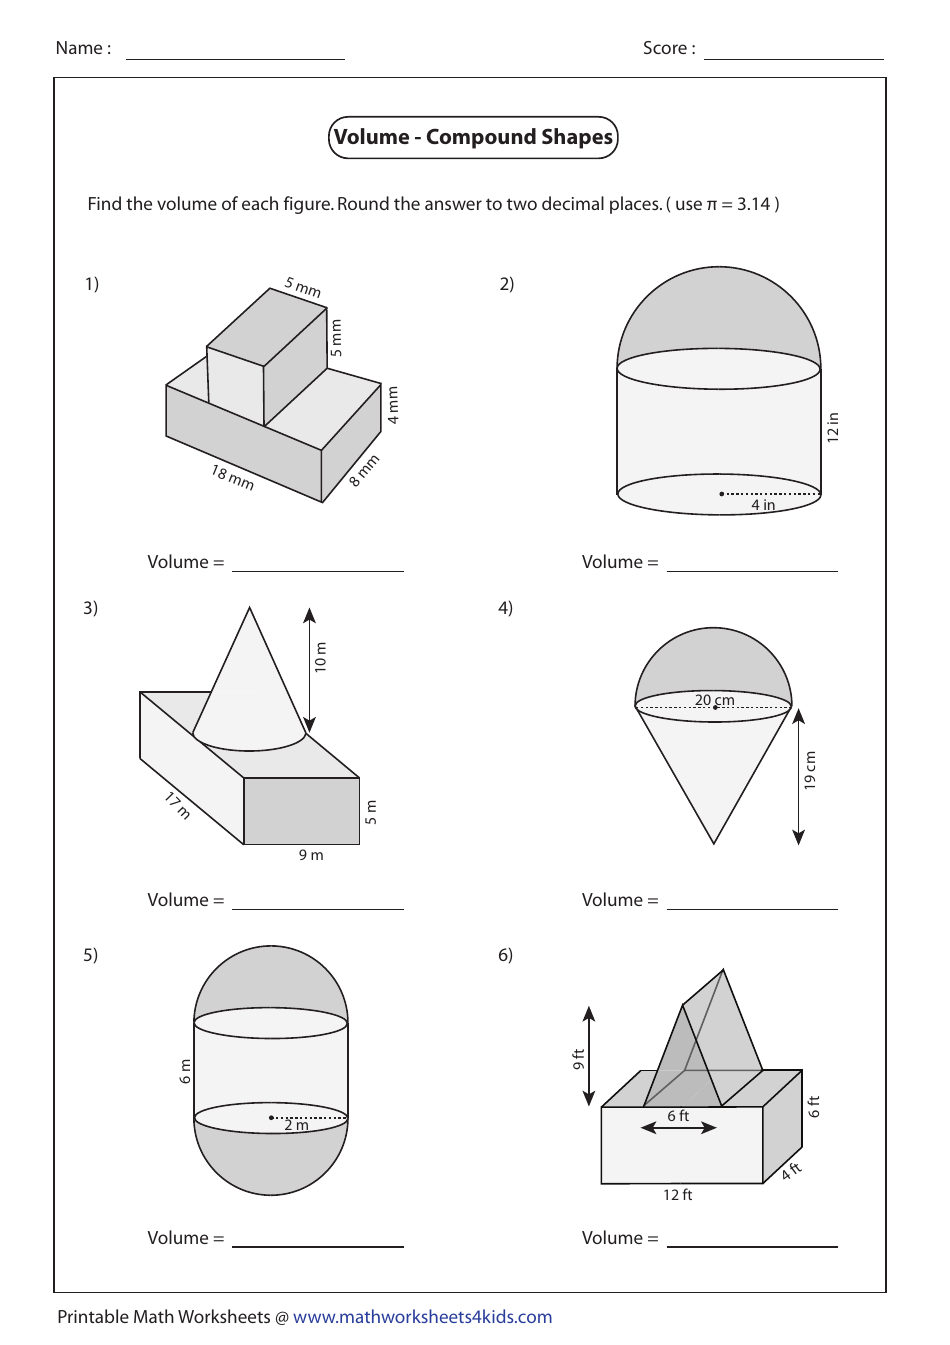 34 Volume Compound Shapes Worksheet Answers Support Volume Of 3d Shapes Worksheet Have Fun 